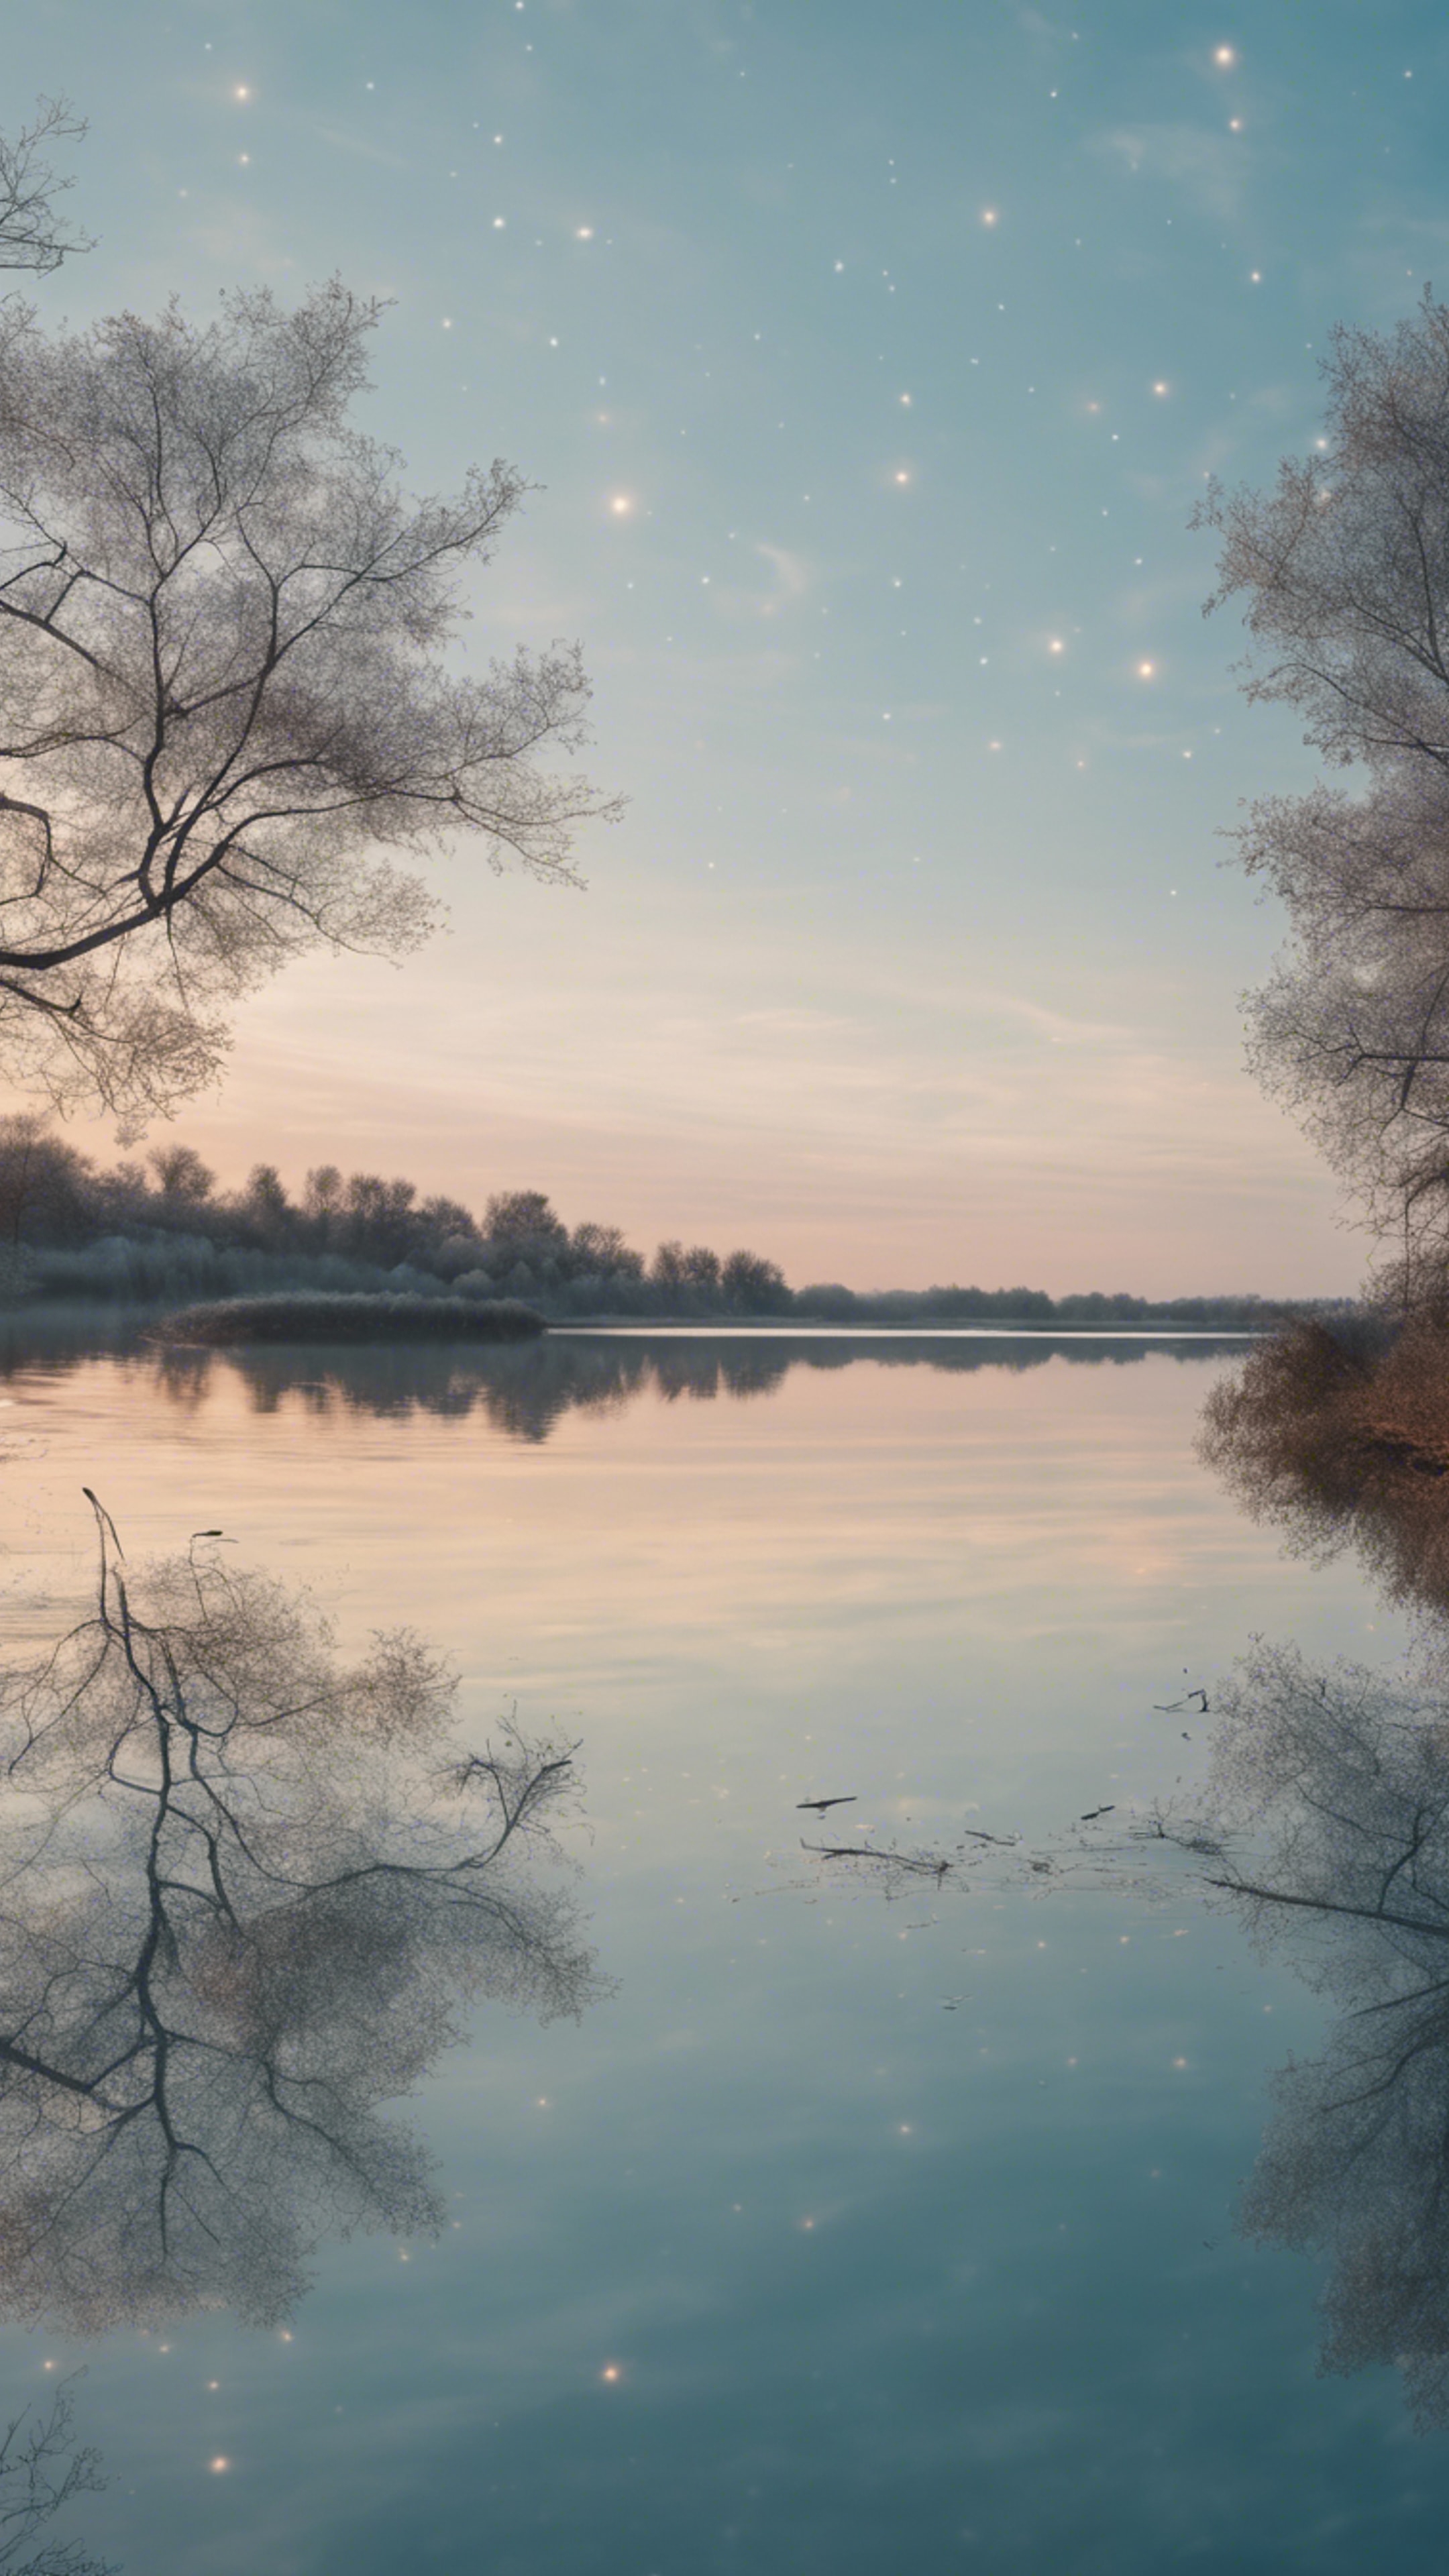 A pastel blue sky at dawn reflecting on a tranquil lake. Papel de parede[f0afb54b812141669b7c]